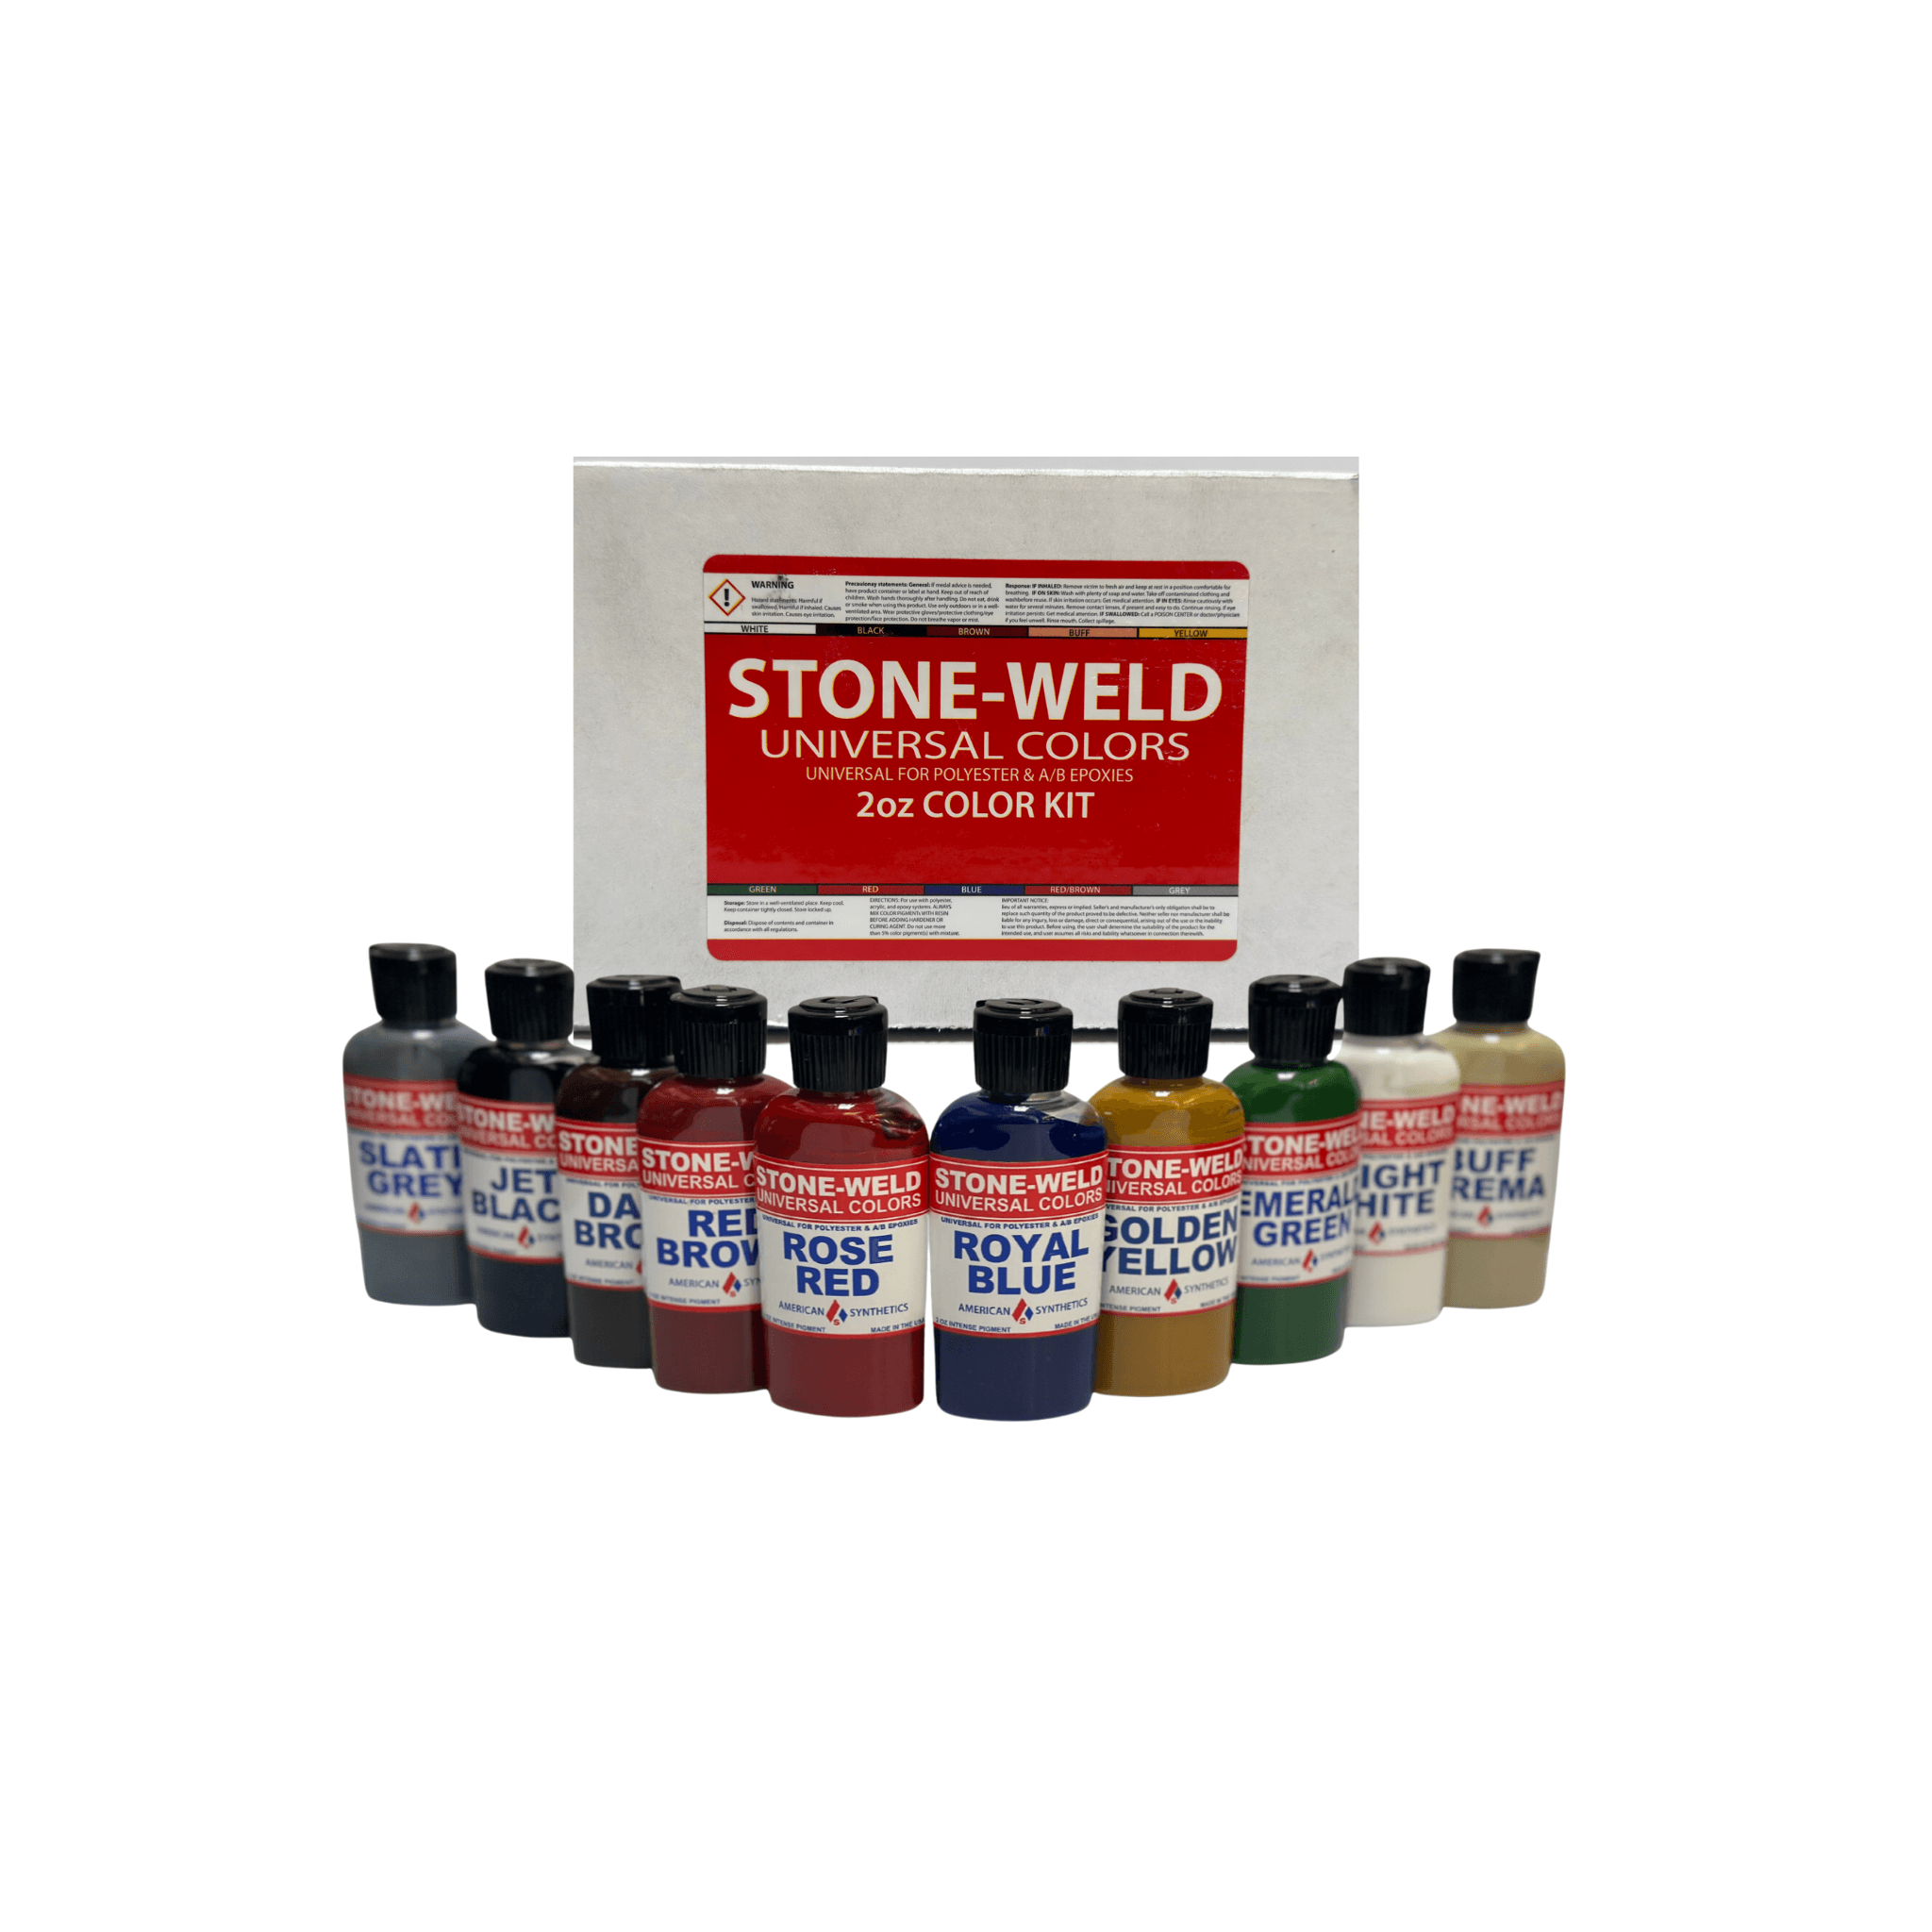 Stone-Weld 2 oz. Universal Color Kit - Direct Stone Tool Supply, Inc